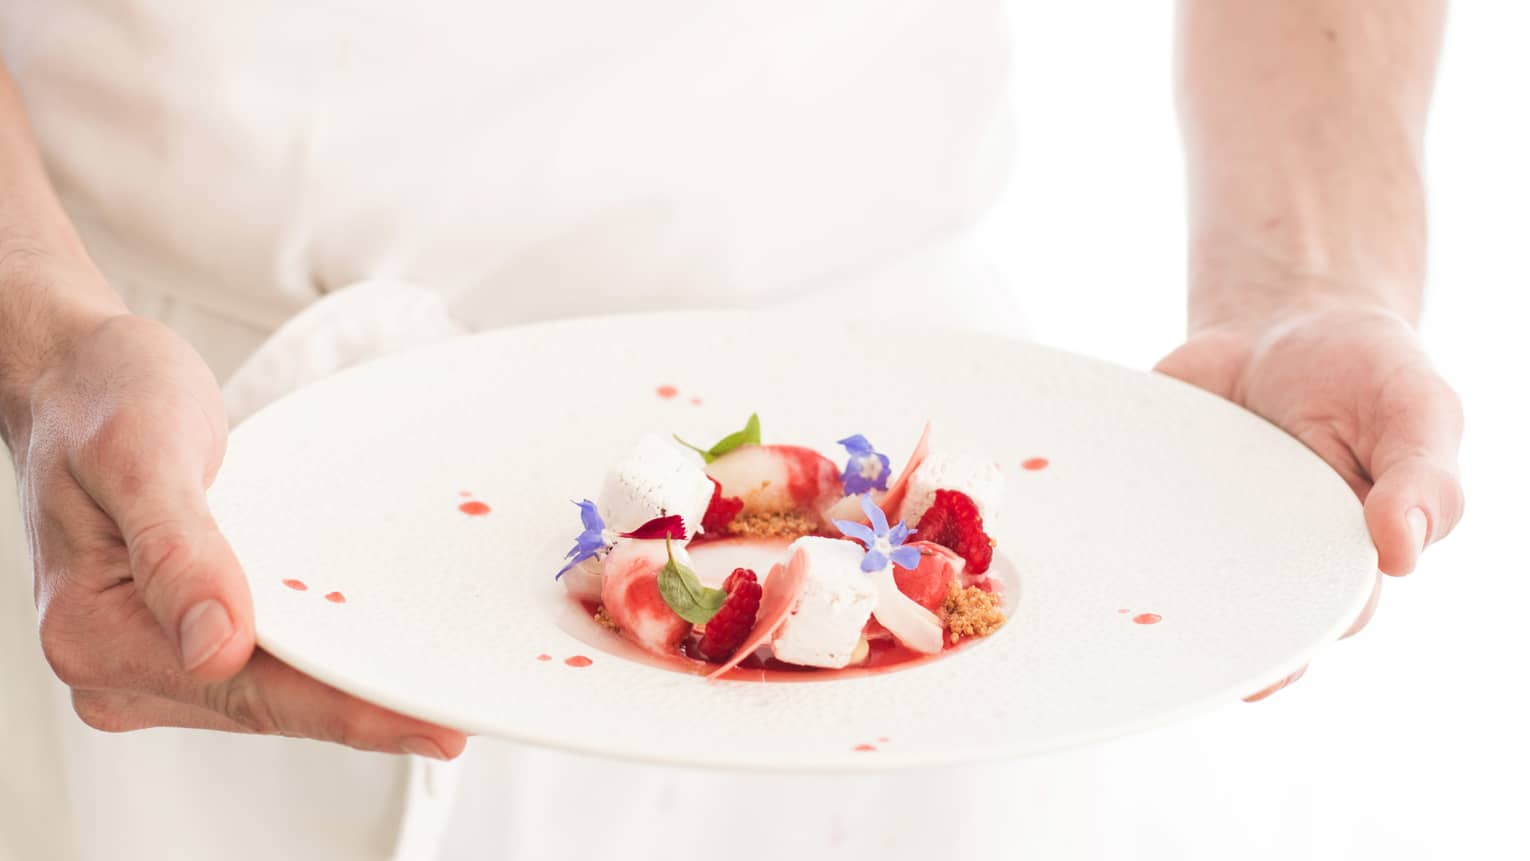 Chef holds white dish with gourmet strawberries and cream dessert